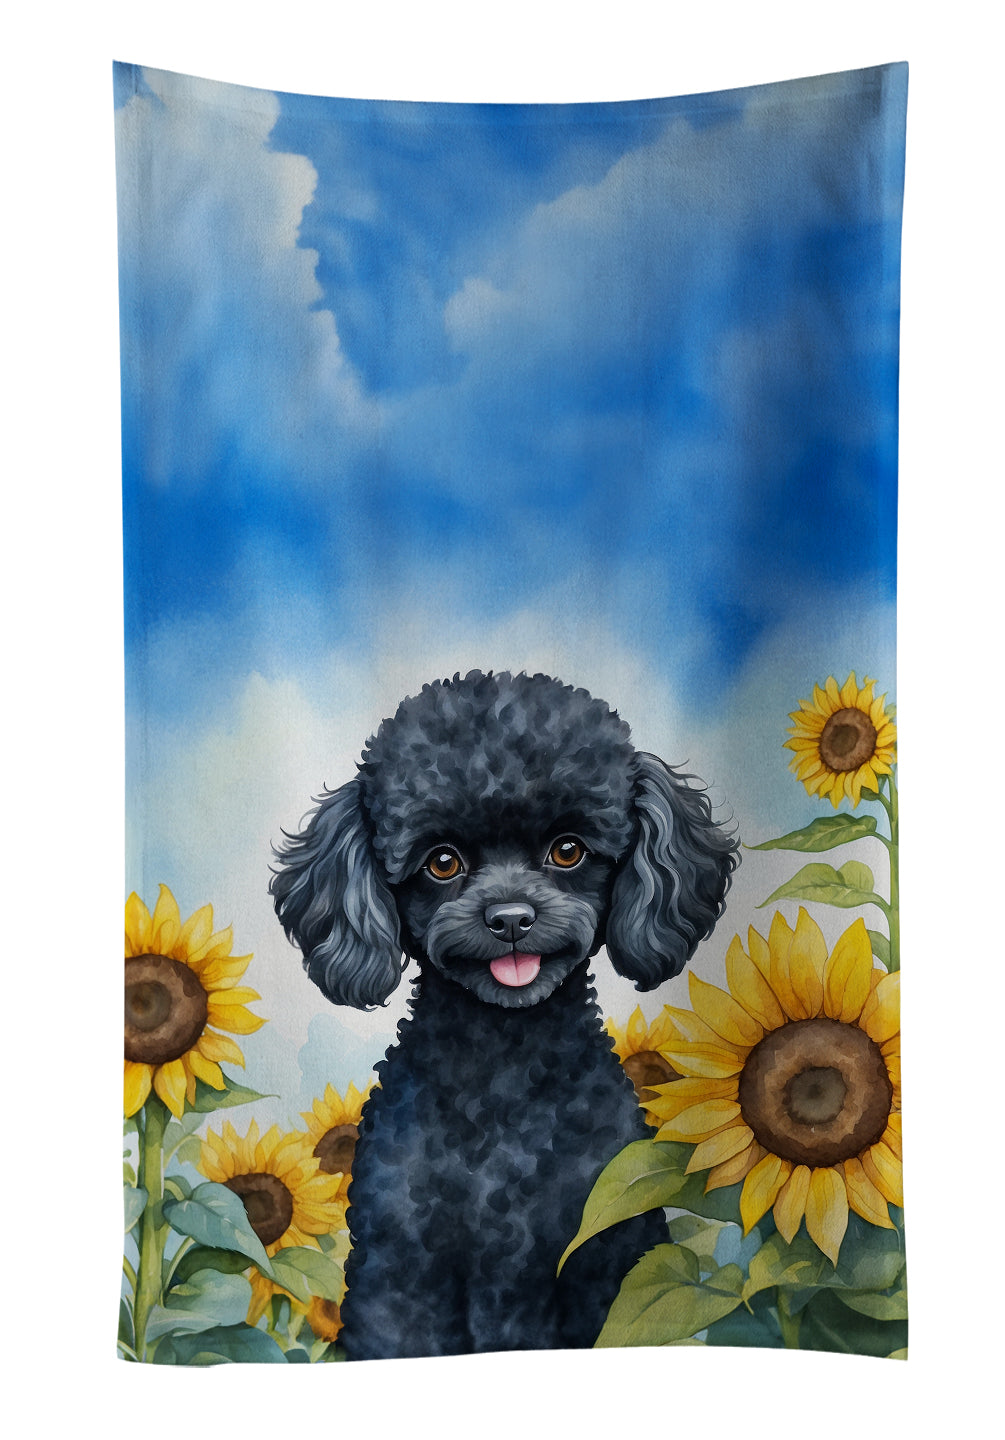 Buy this Black Poodle in Sunflowers Kitchen Towel